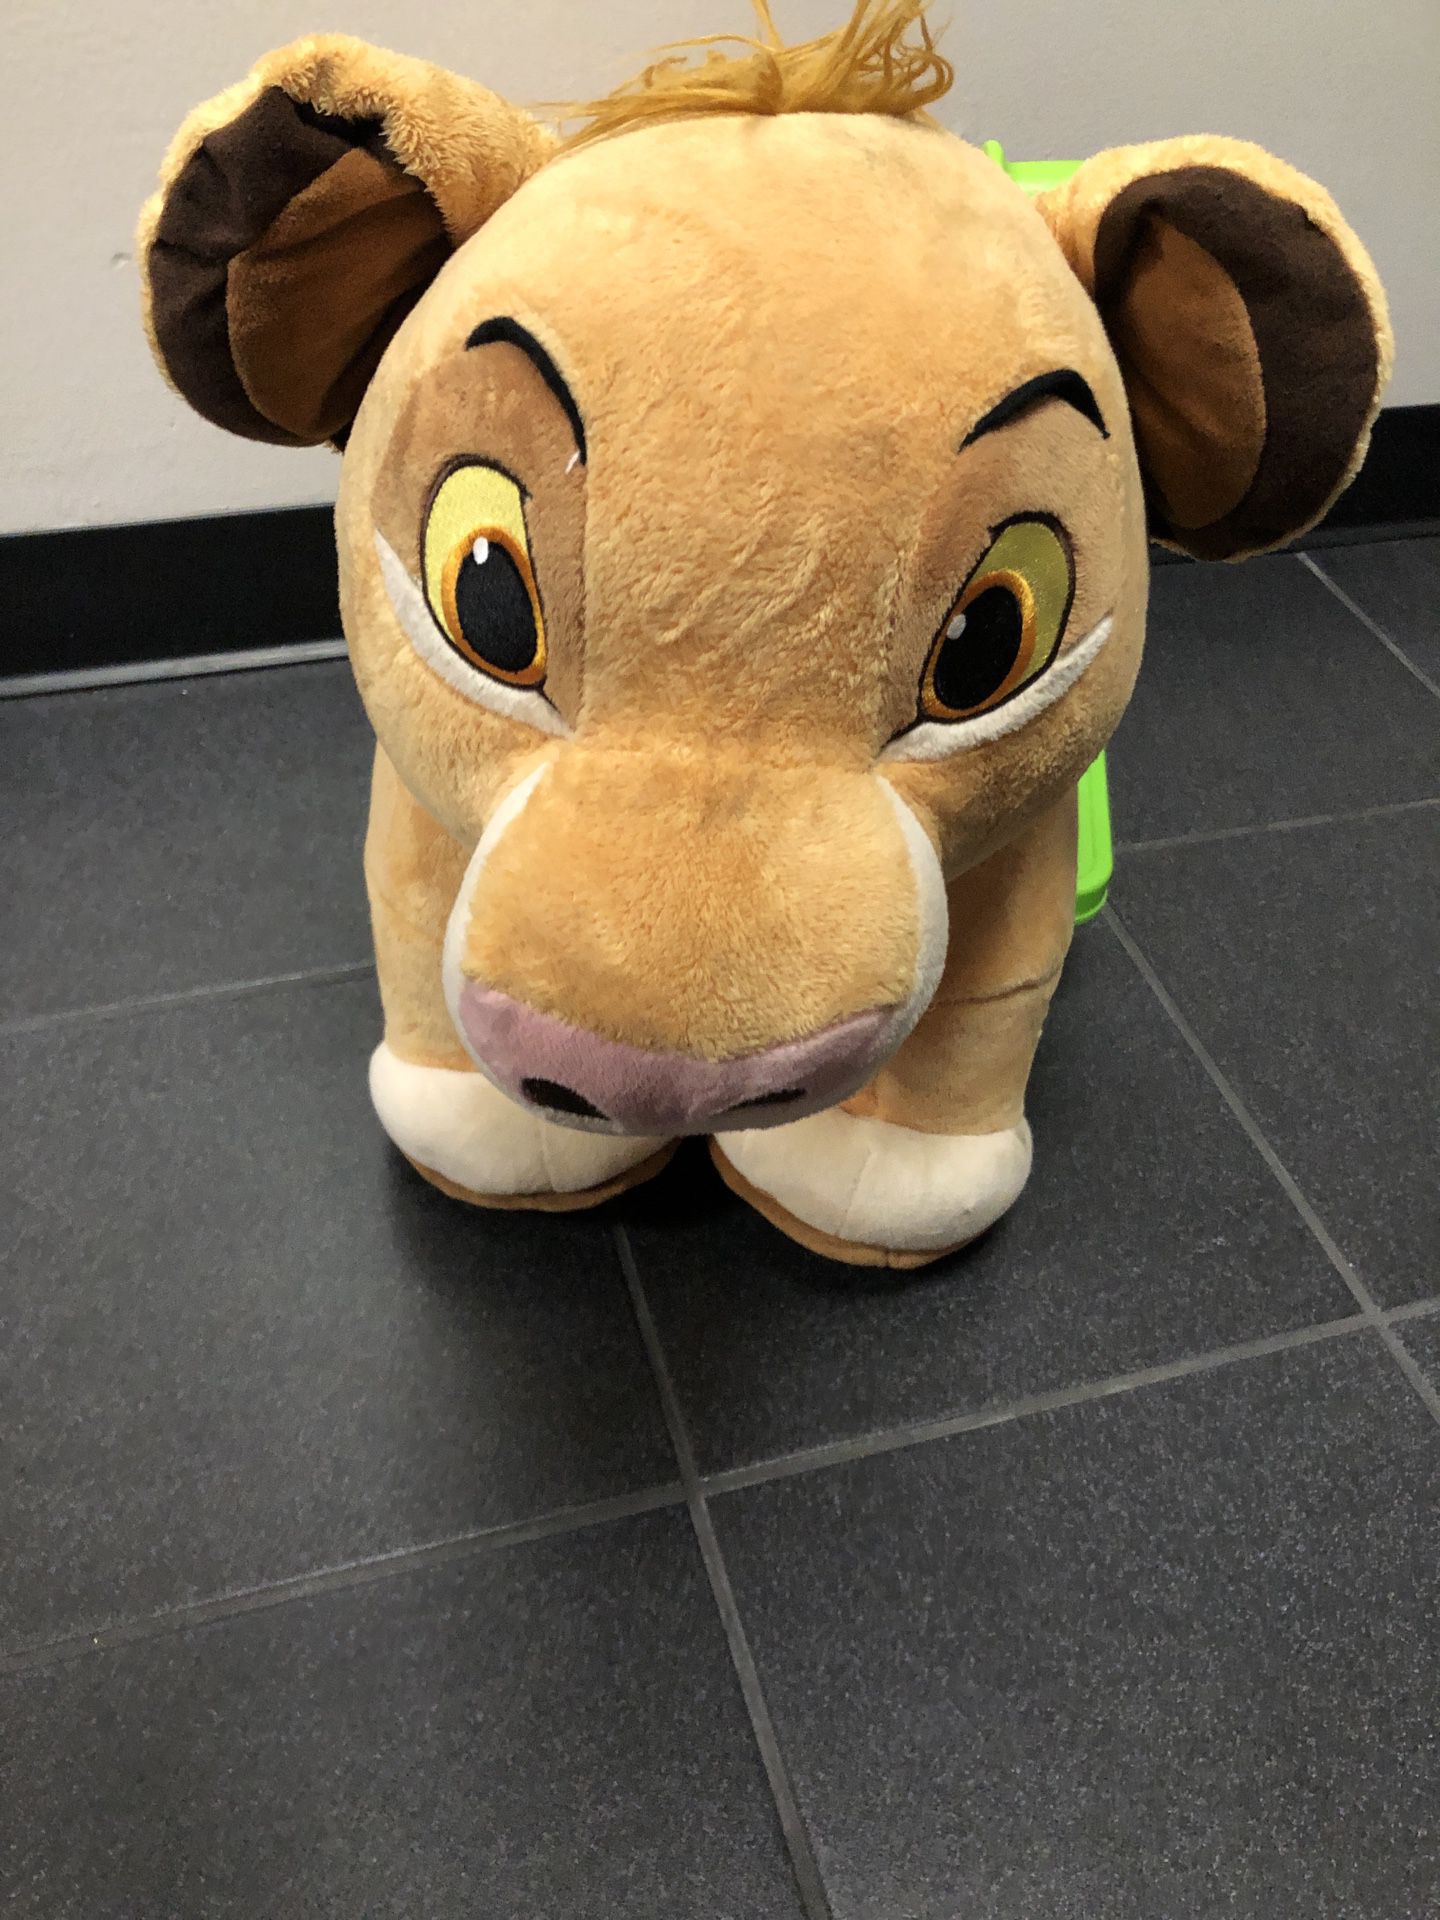 Disney Lion King Simba 6V Plush Ride-On Toy for Toddlers by Huffy